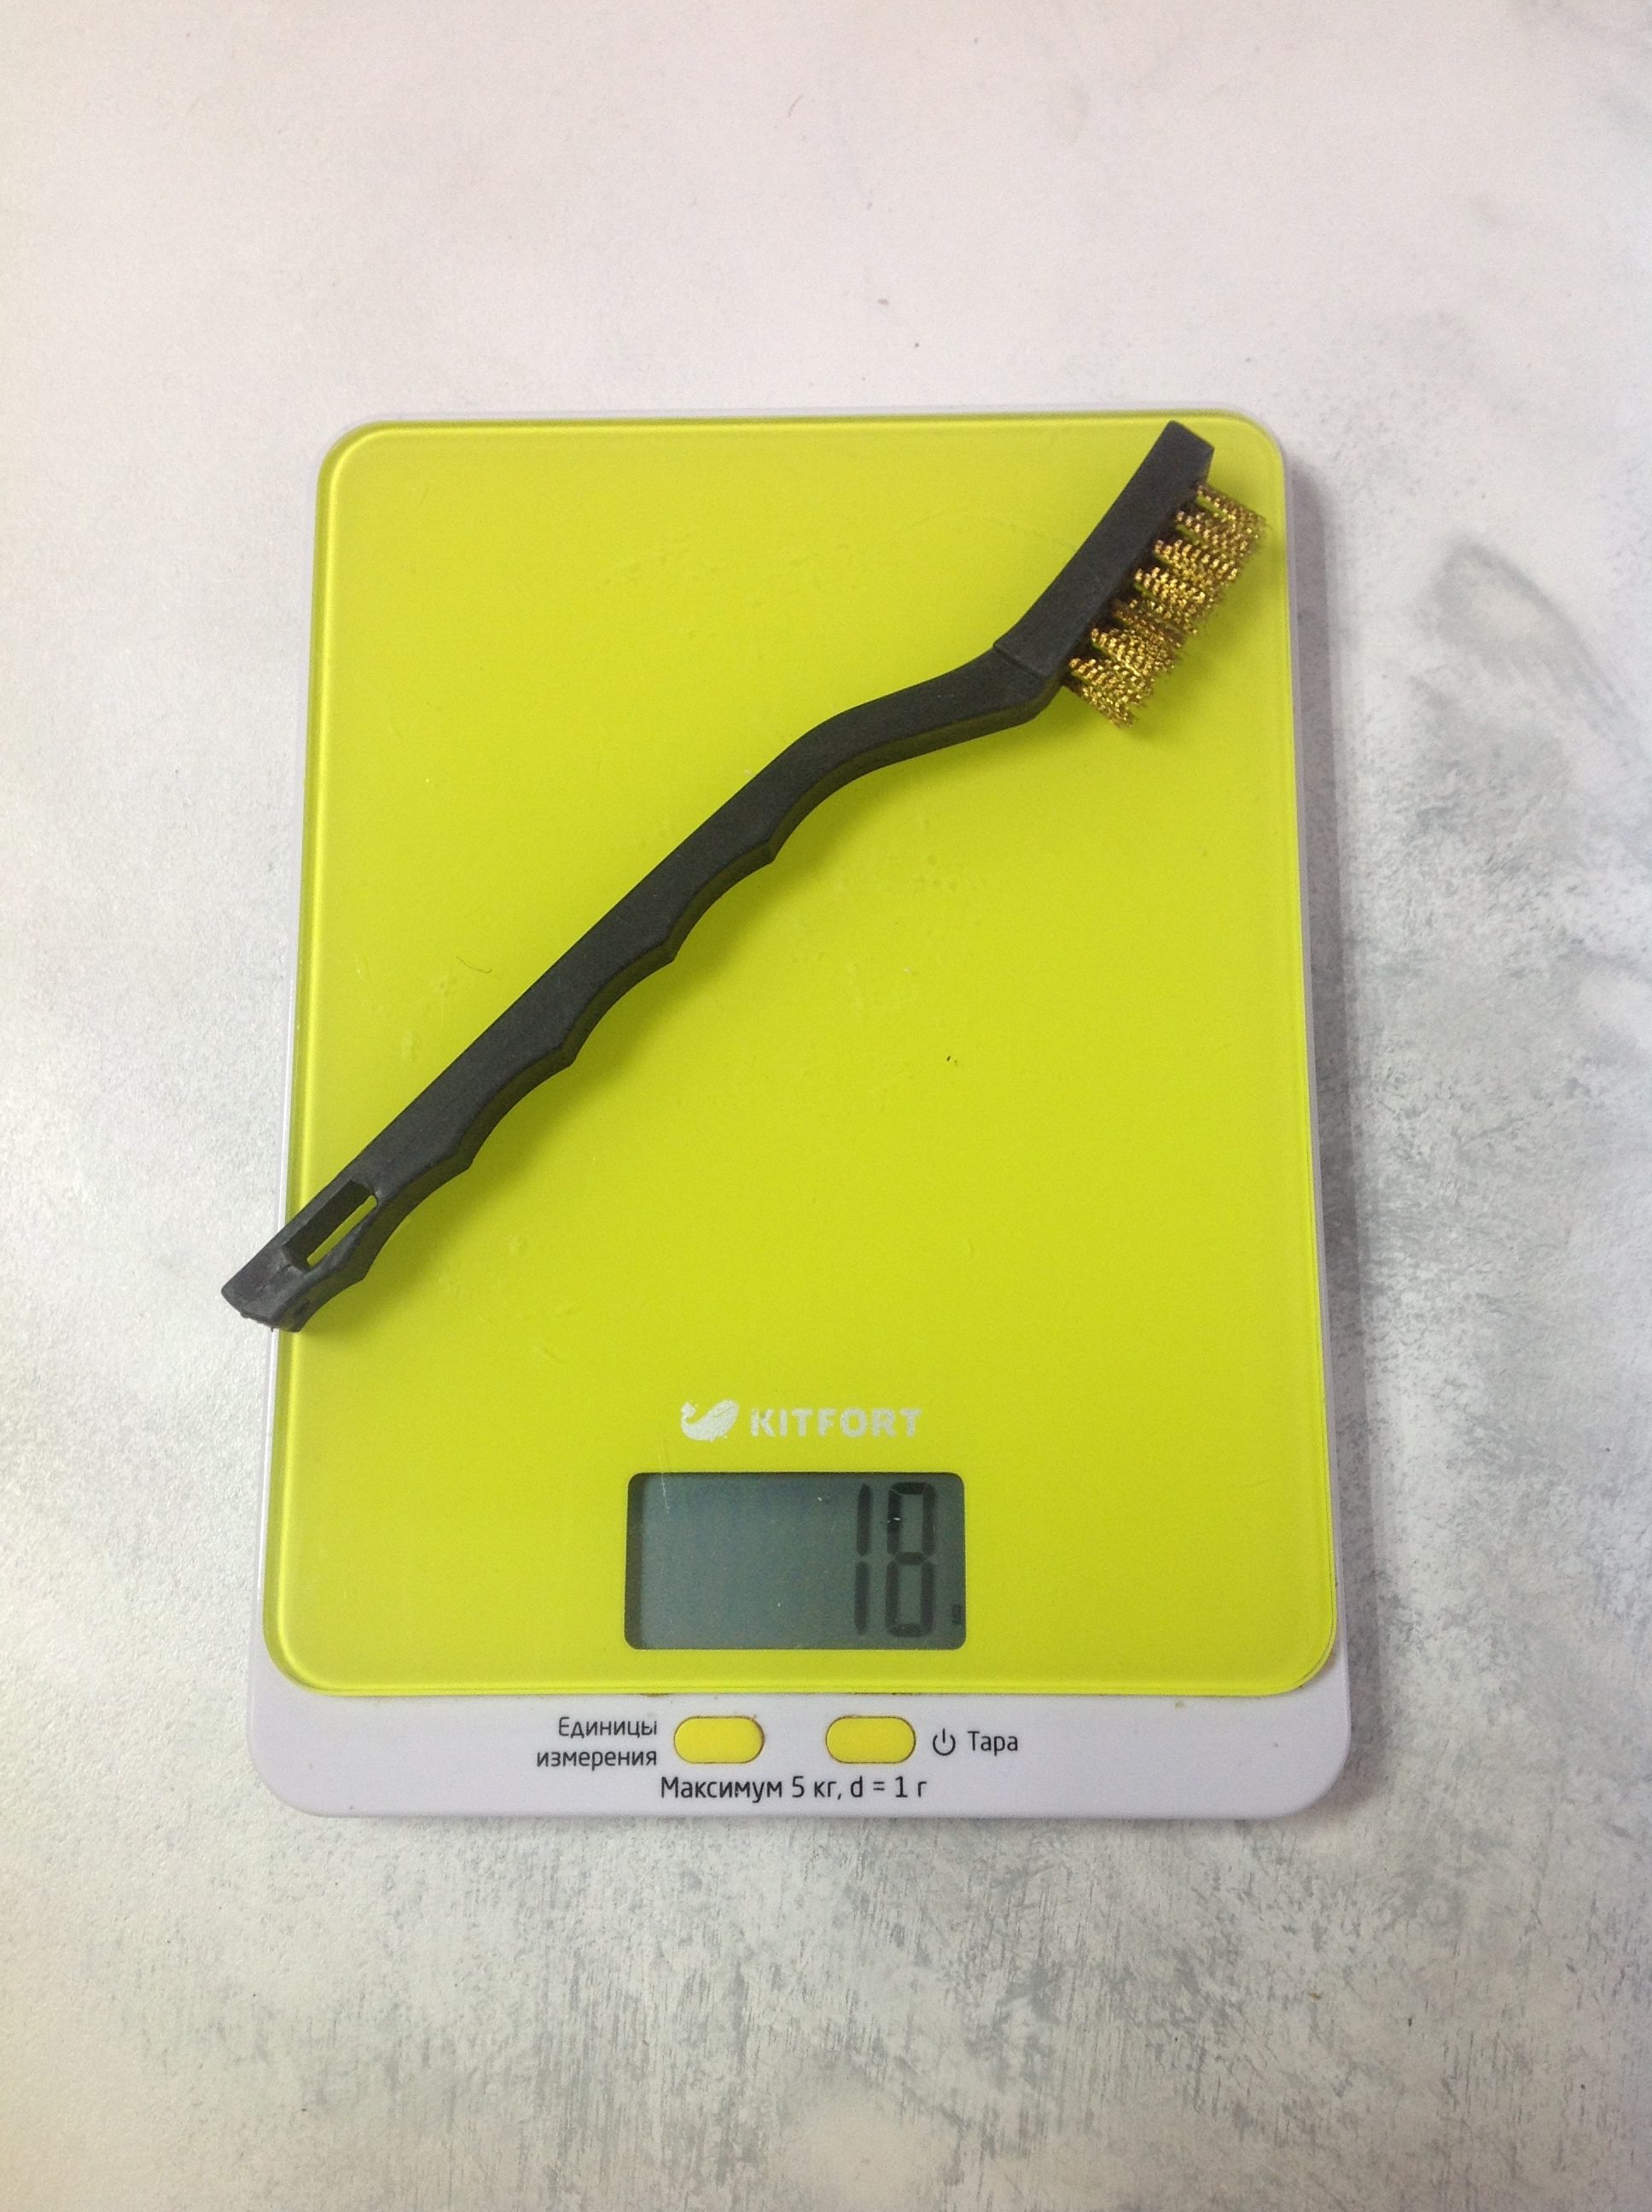 How much does a small metal brush for brushing weigh?